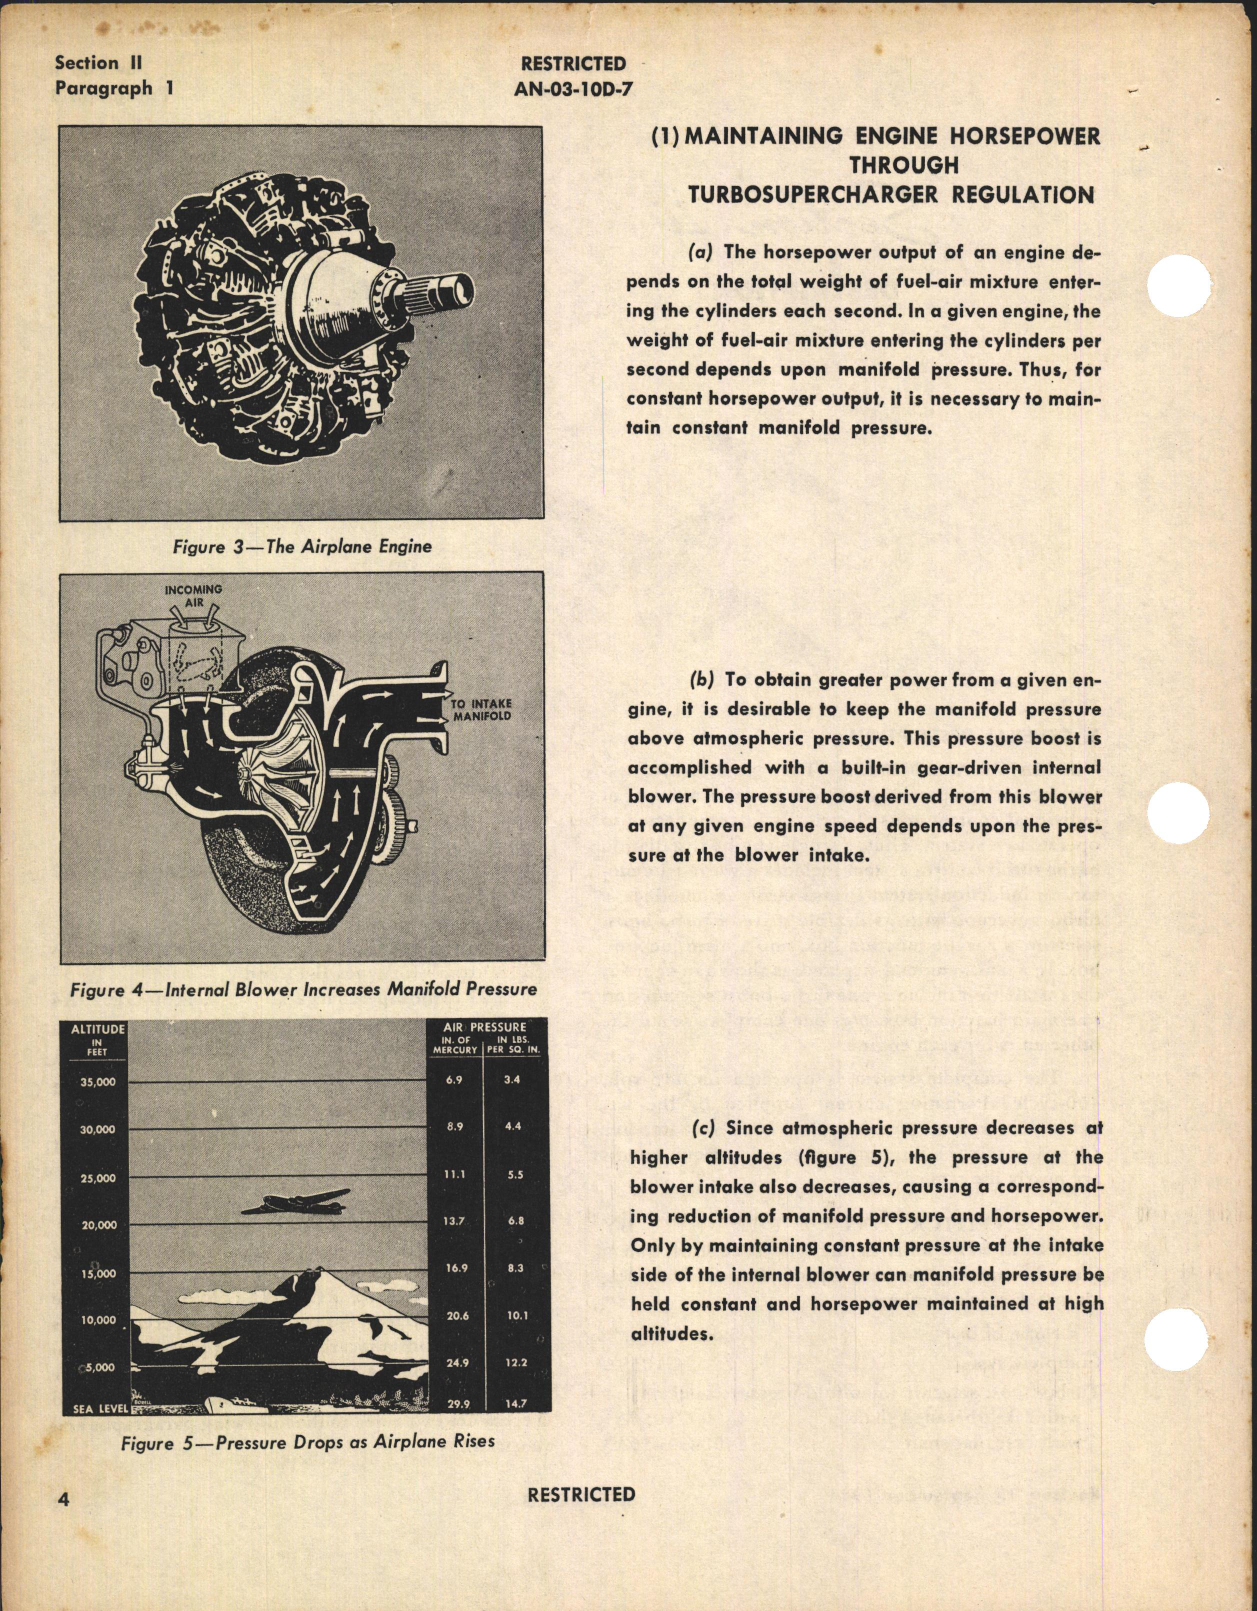 Sample page 8 from AirCorps Library document: Overhaul Instructions with Parts Catalog for Type B Electronic Control System (Turbosupercharger Regulator)